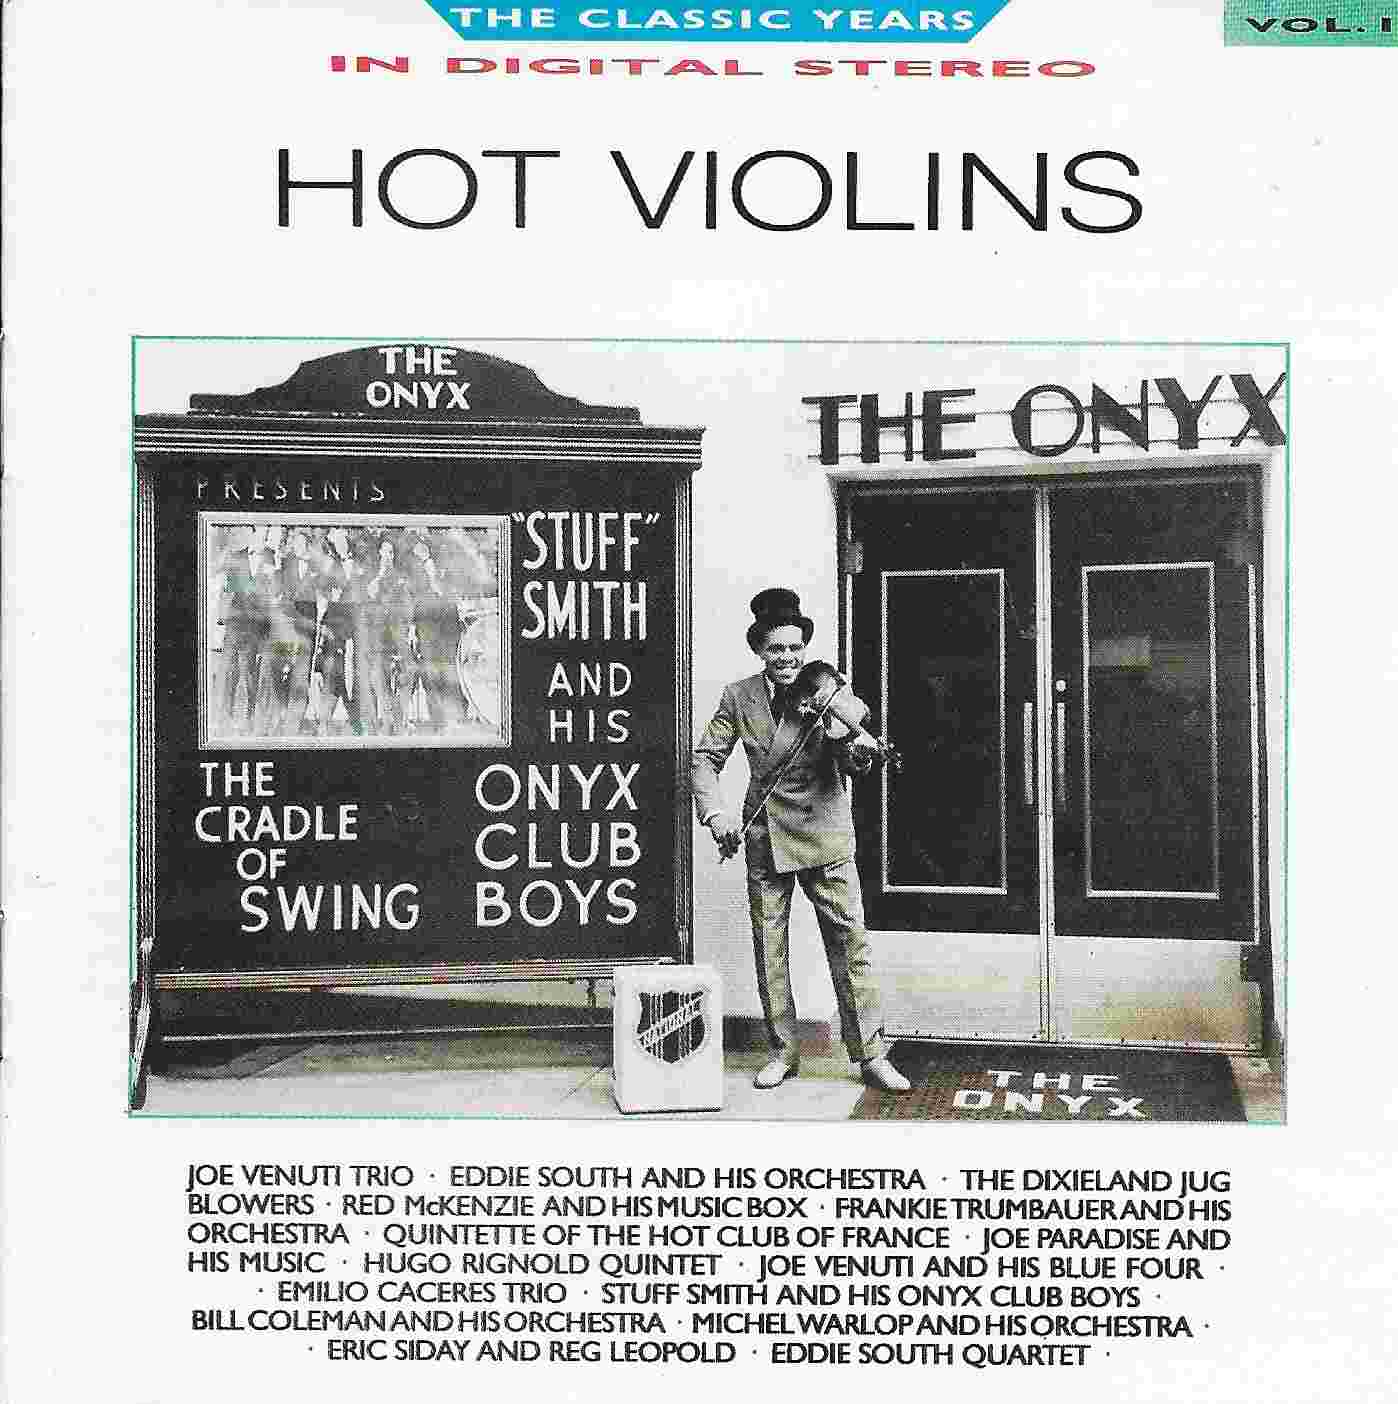 Picture of Classic years - Volume 11, Hot violins by artist Various from the BBC cds - Records and Tapes library